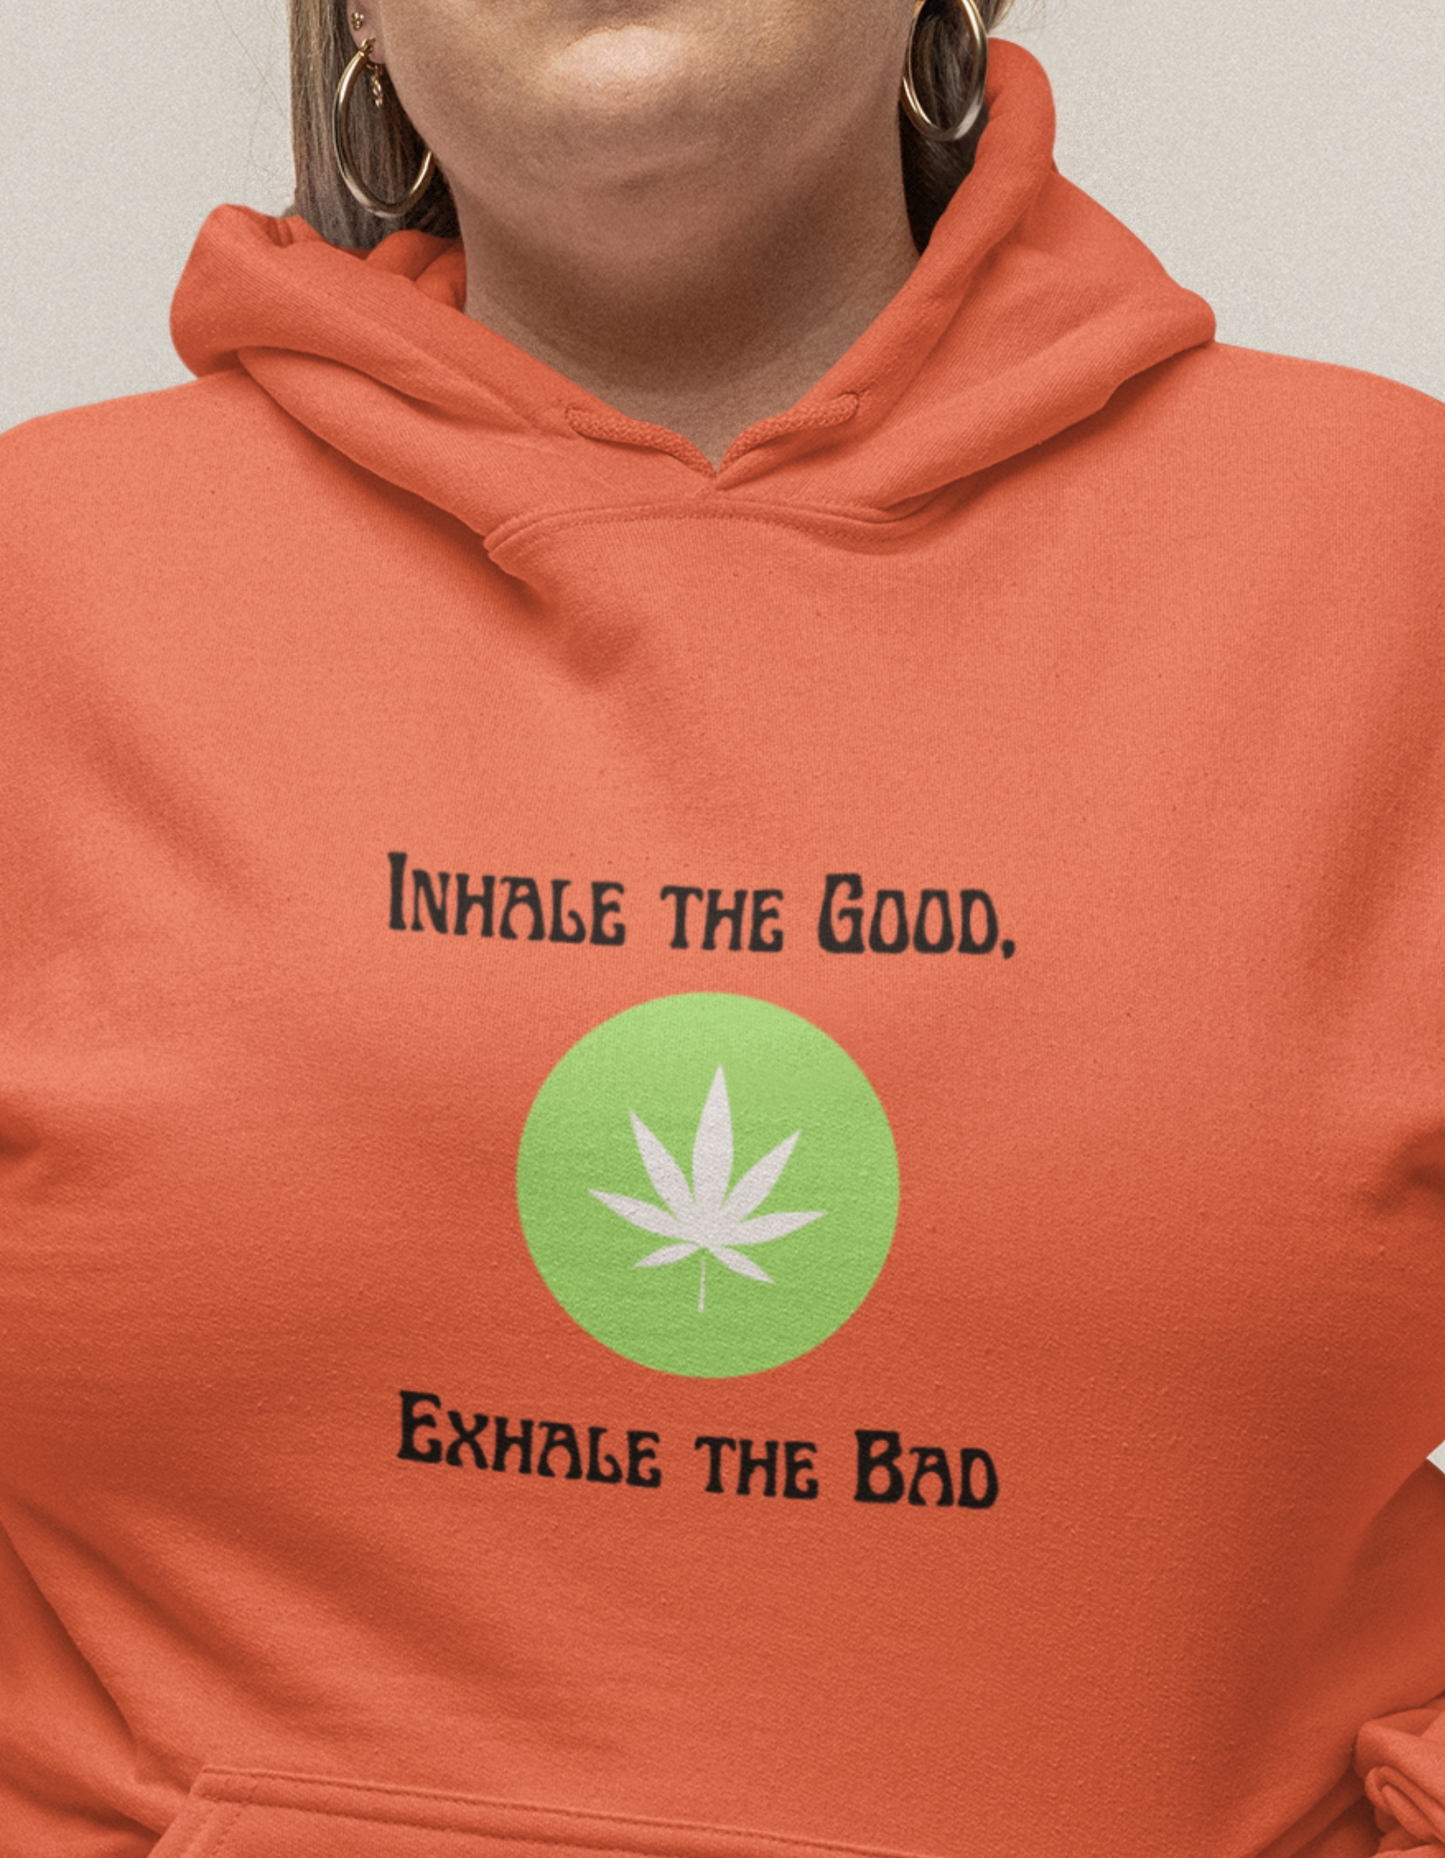 Inhale the Good, Exhale the Bad  - Unisex